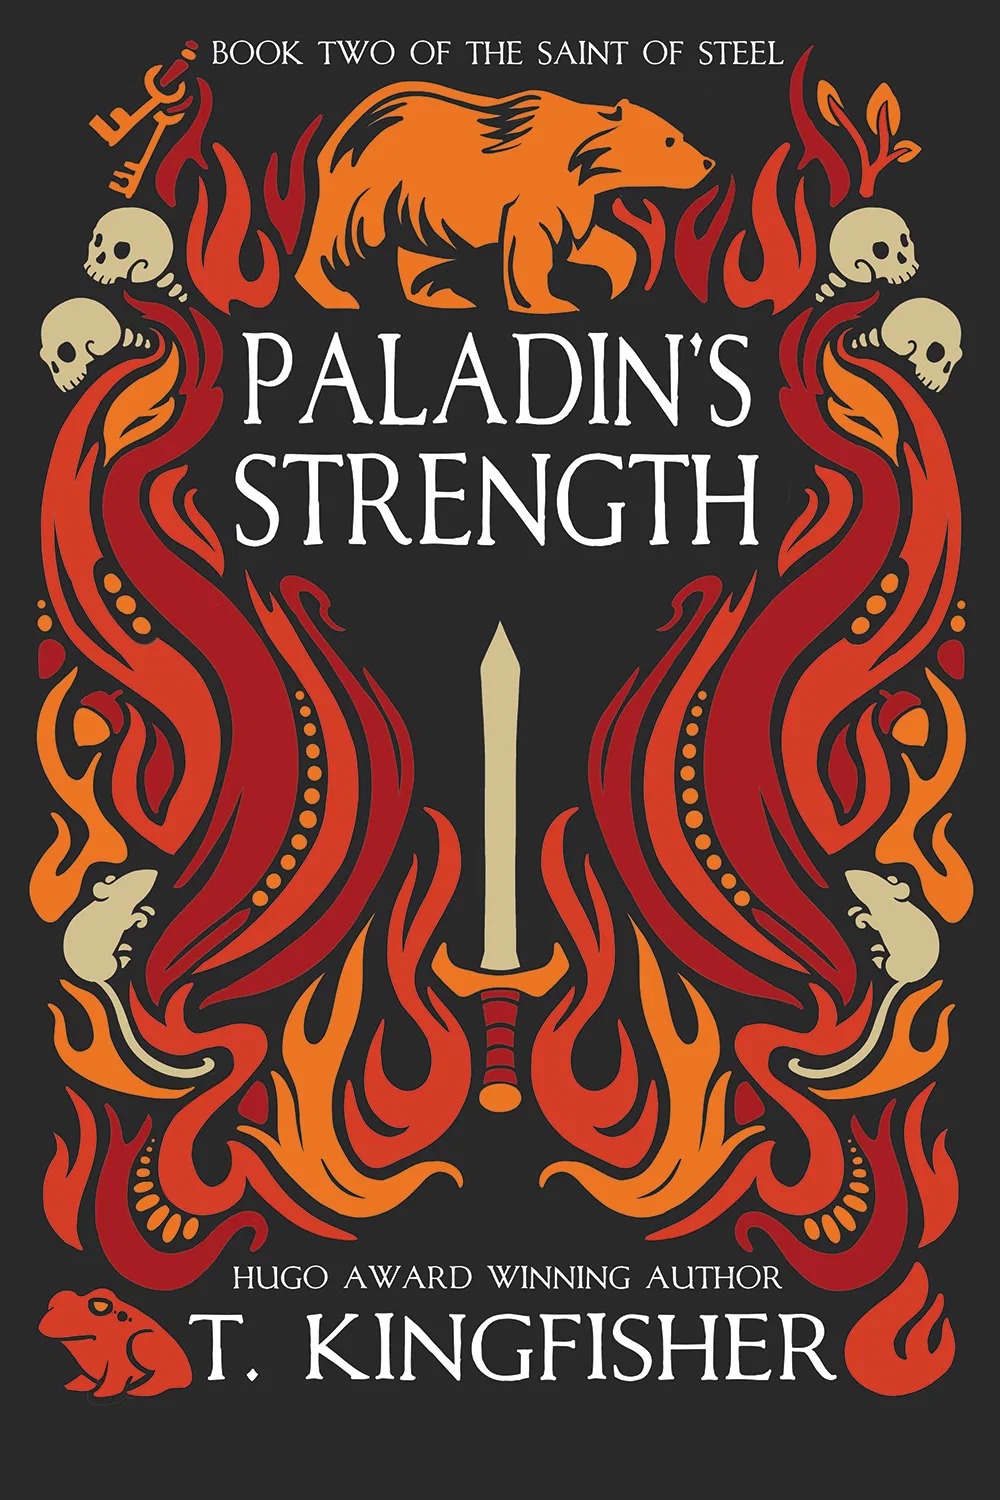 T Kingfisher (duplicate), T. Kingfisher: Paladin's Strength (Hardcover, 2021, Argyll Productions)